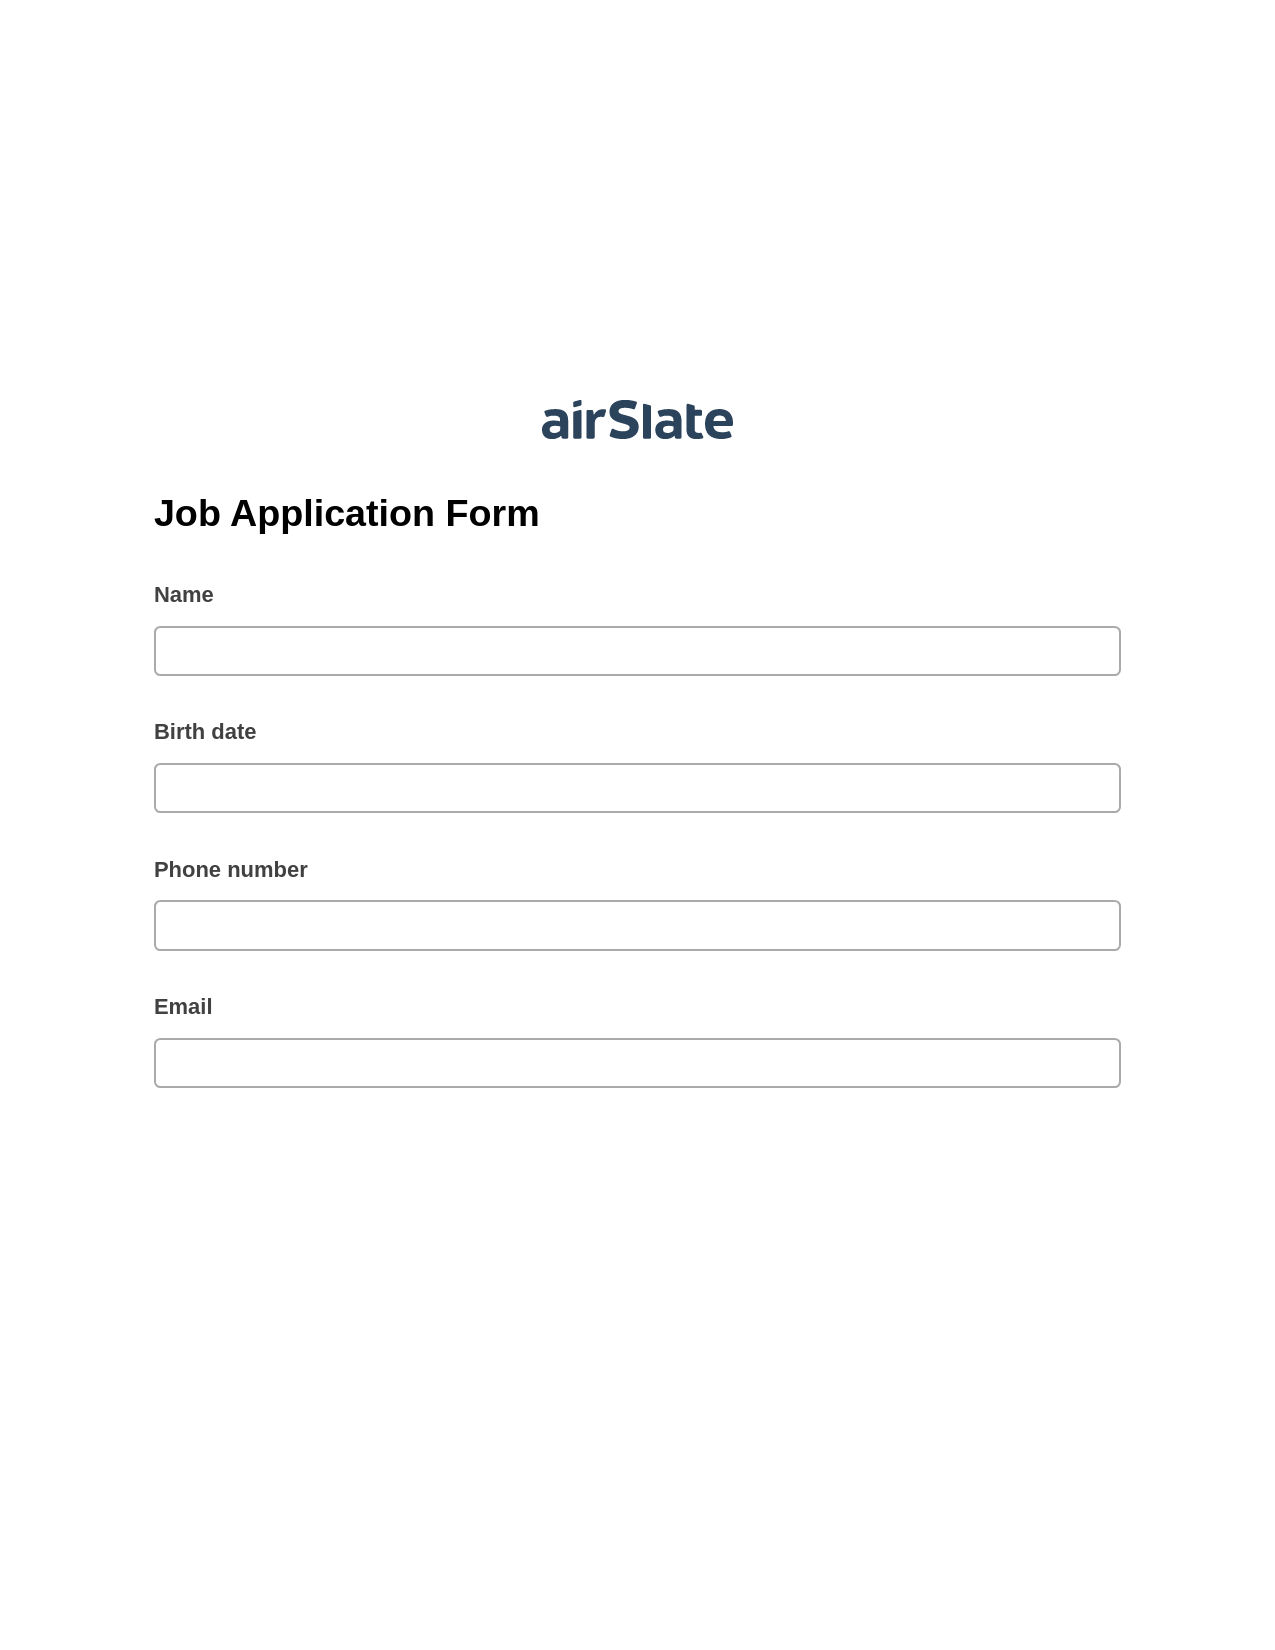 Job Application Form Pre-fill from Salesforce Records with SOQL Bot, Create slate bot, Export to Salesforce Bot